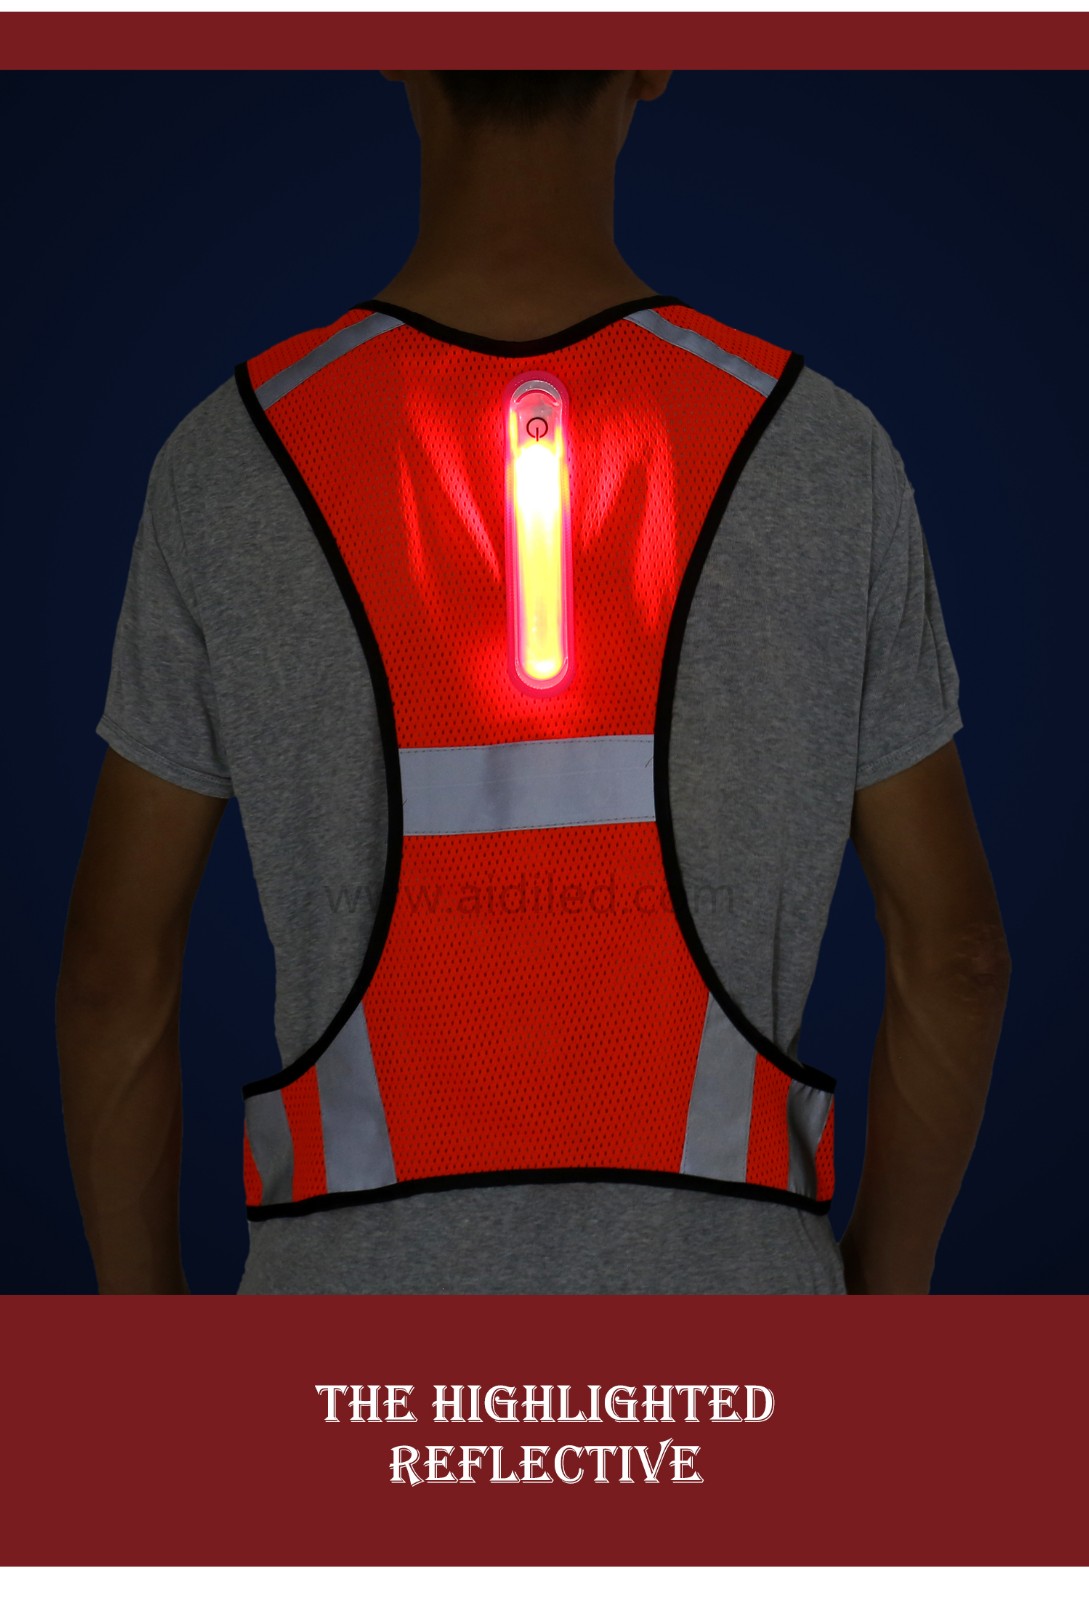 -| Led Outdoor Sports Safety Vest Aidi-s11 - Shenghong-3